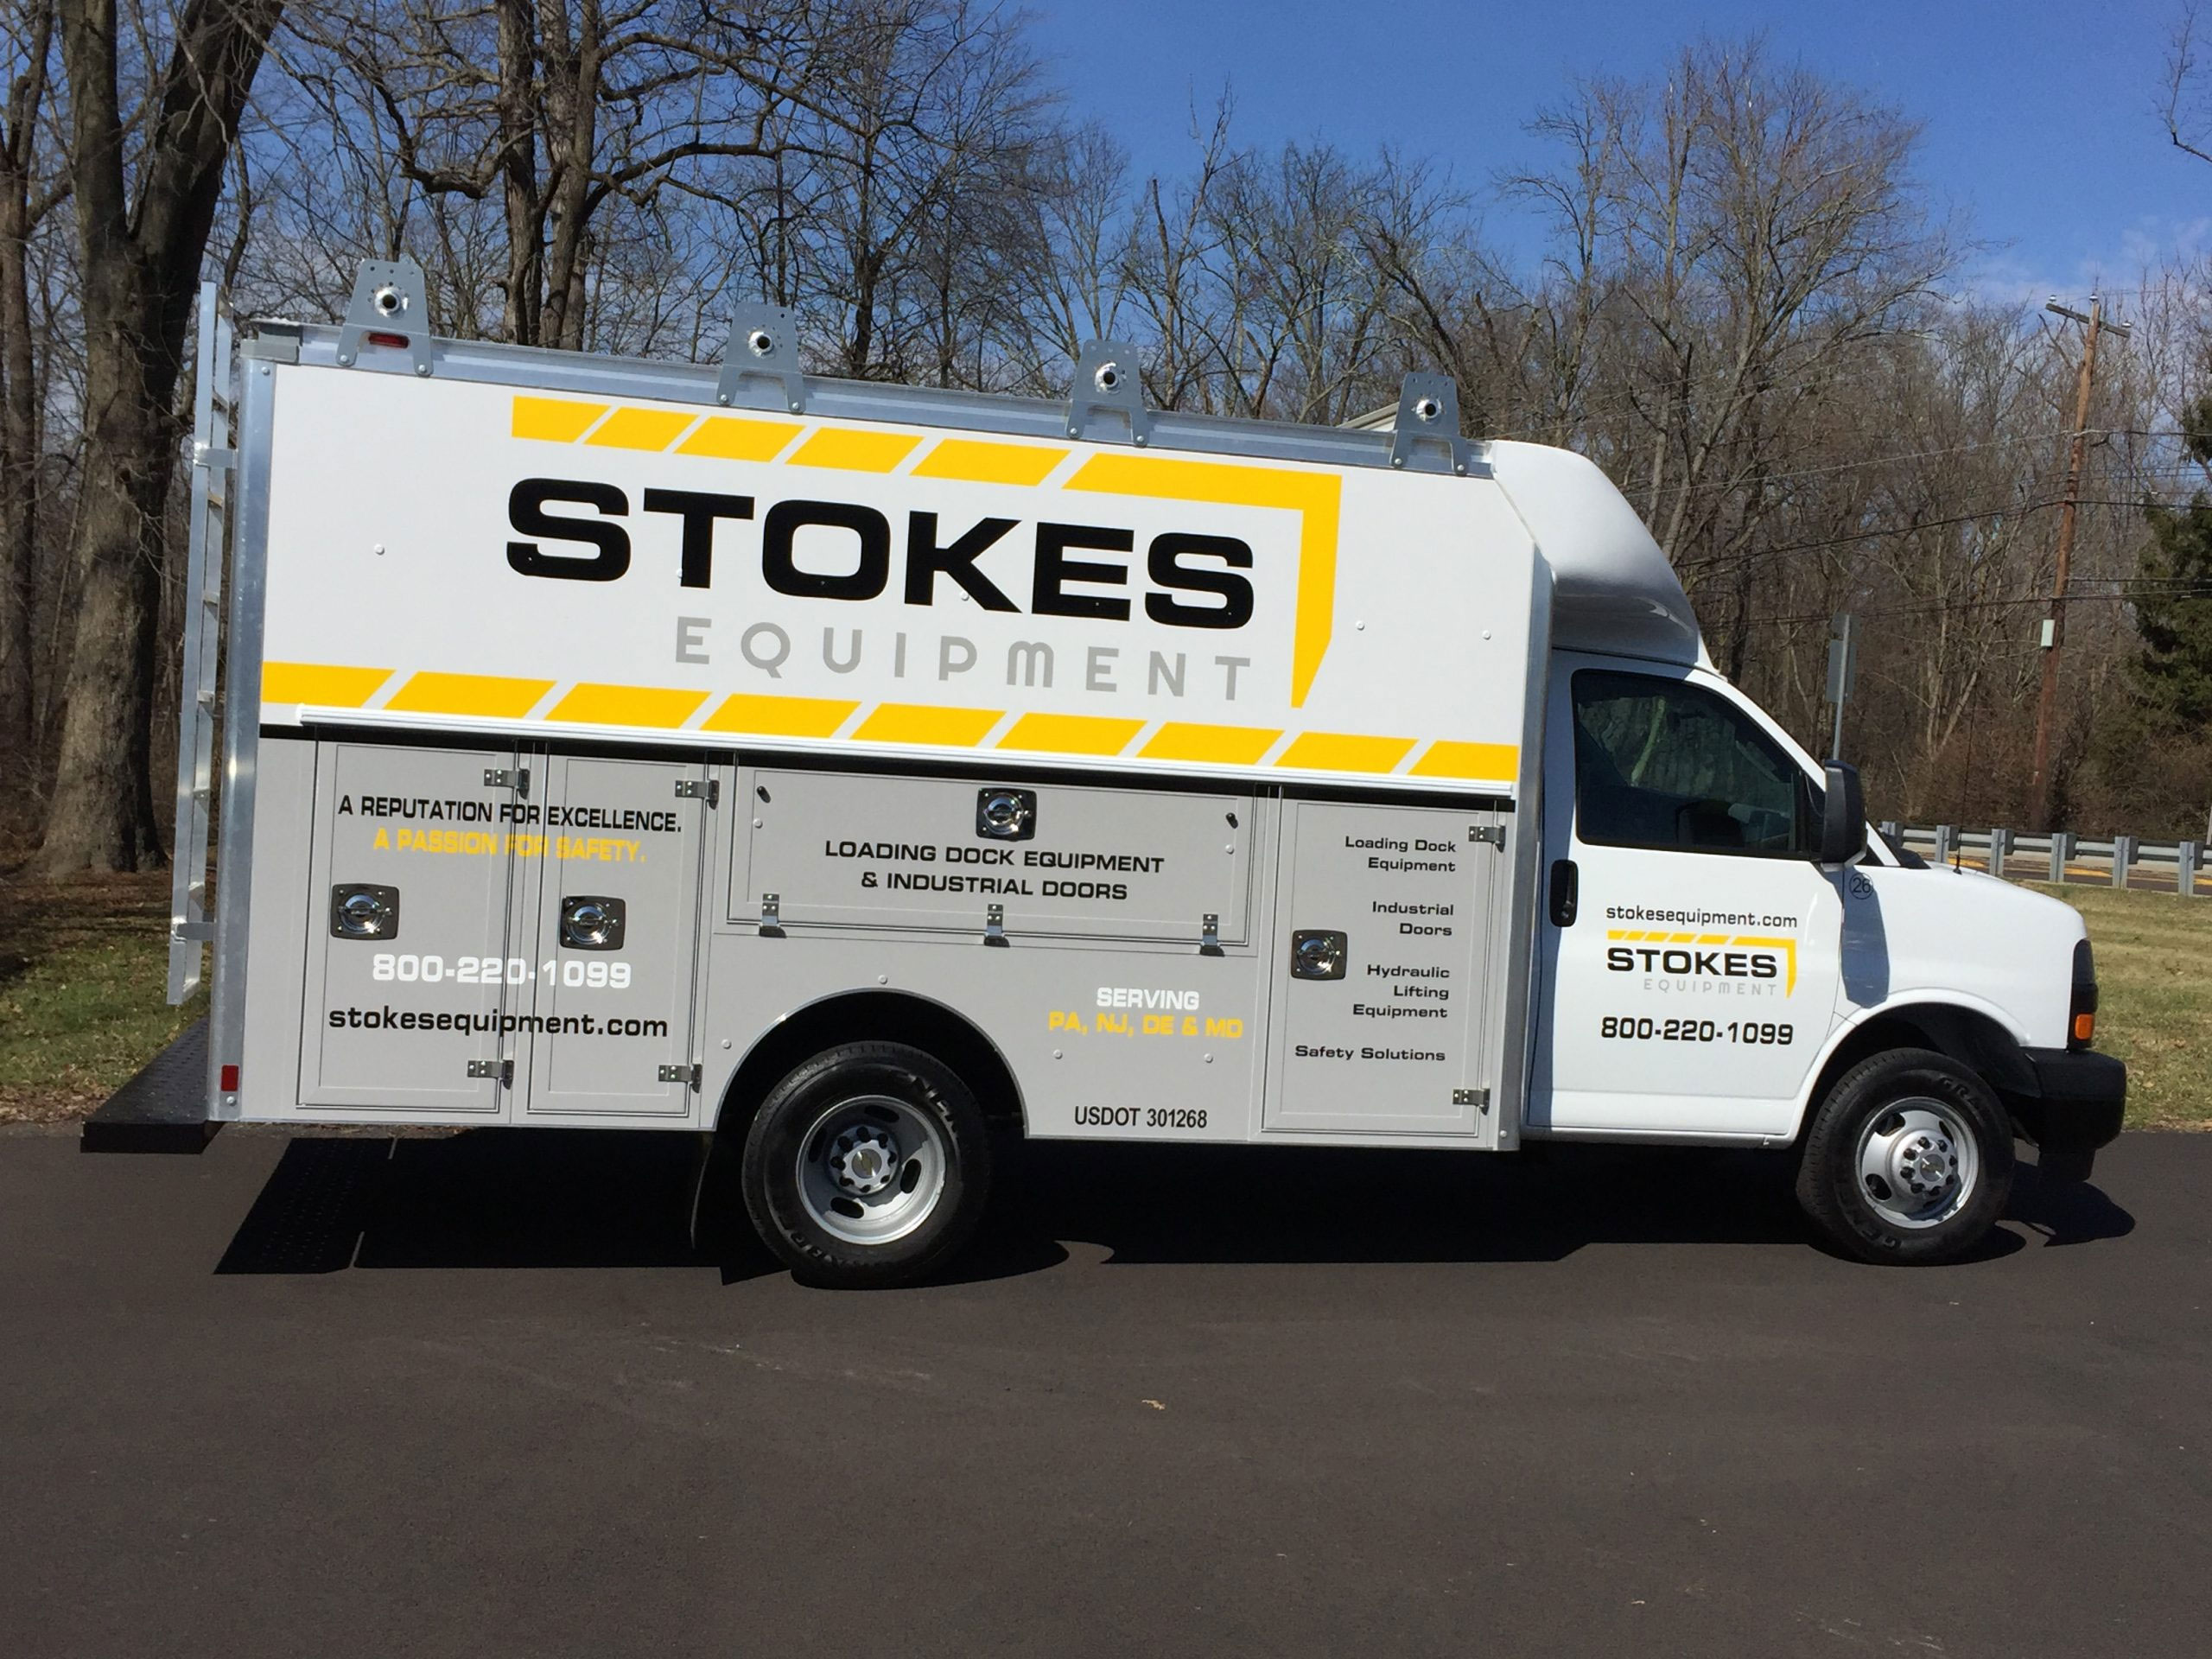 5 Reasons to Work With Stokes Equipment Company